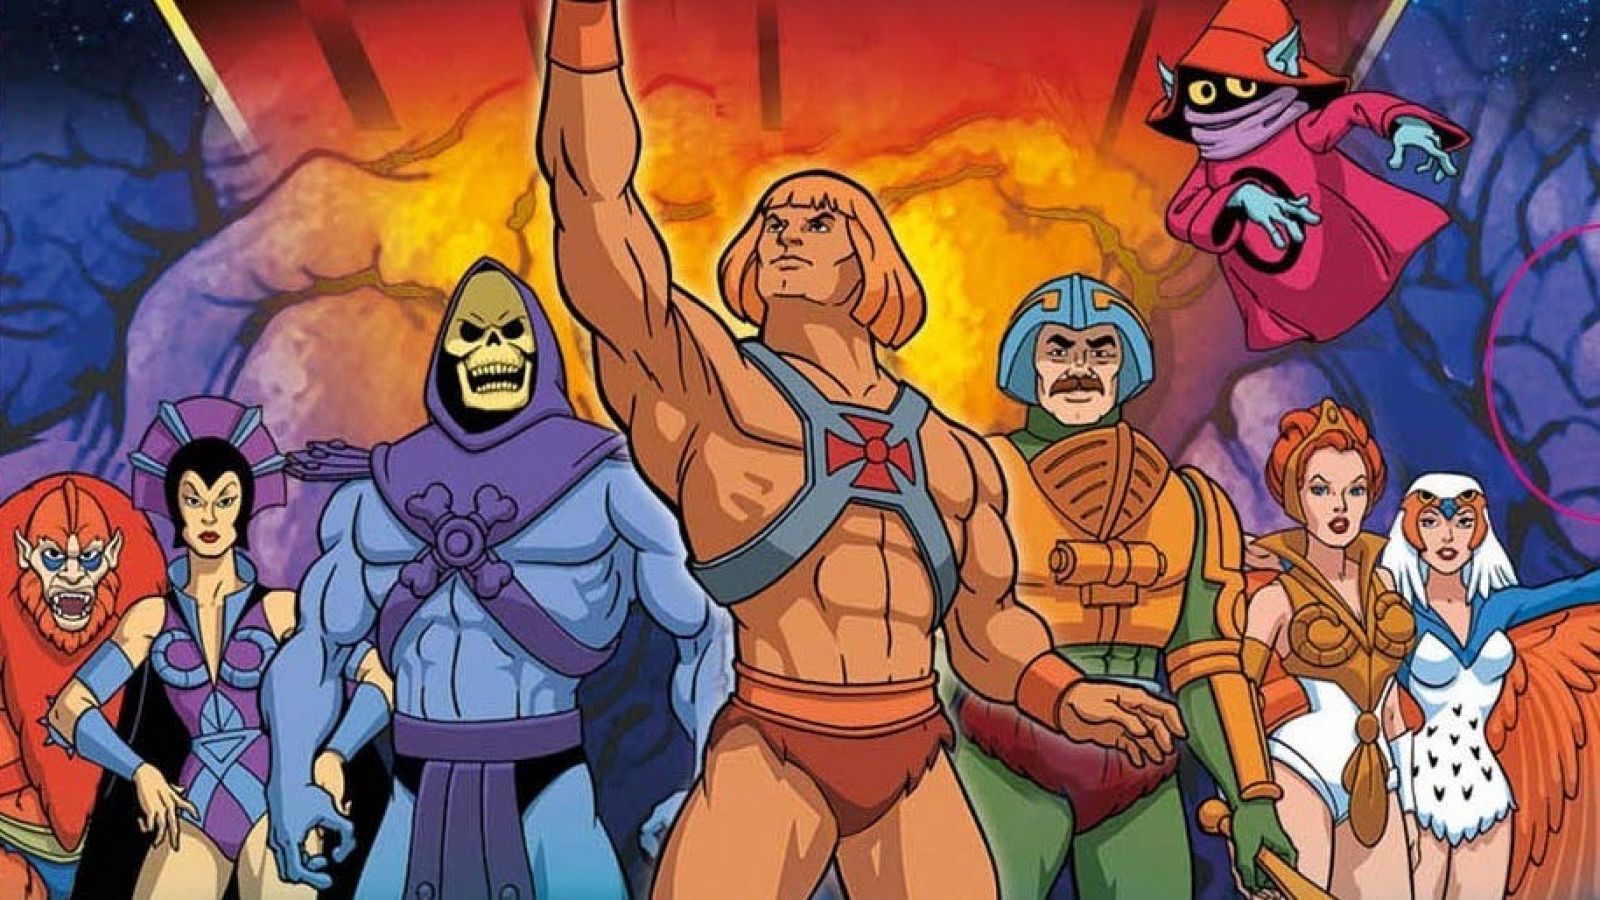 He-Man, She-Ra and the Masters of the Universe claim power